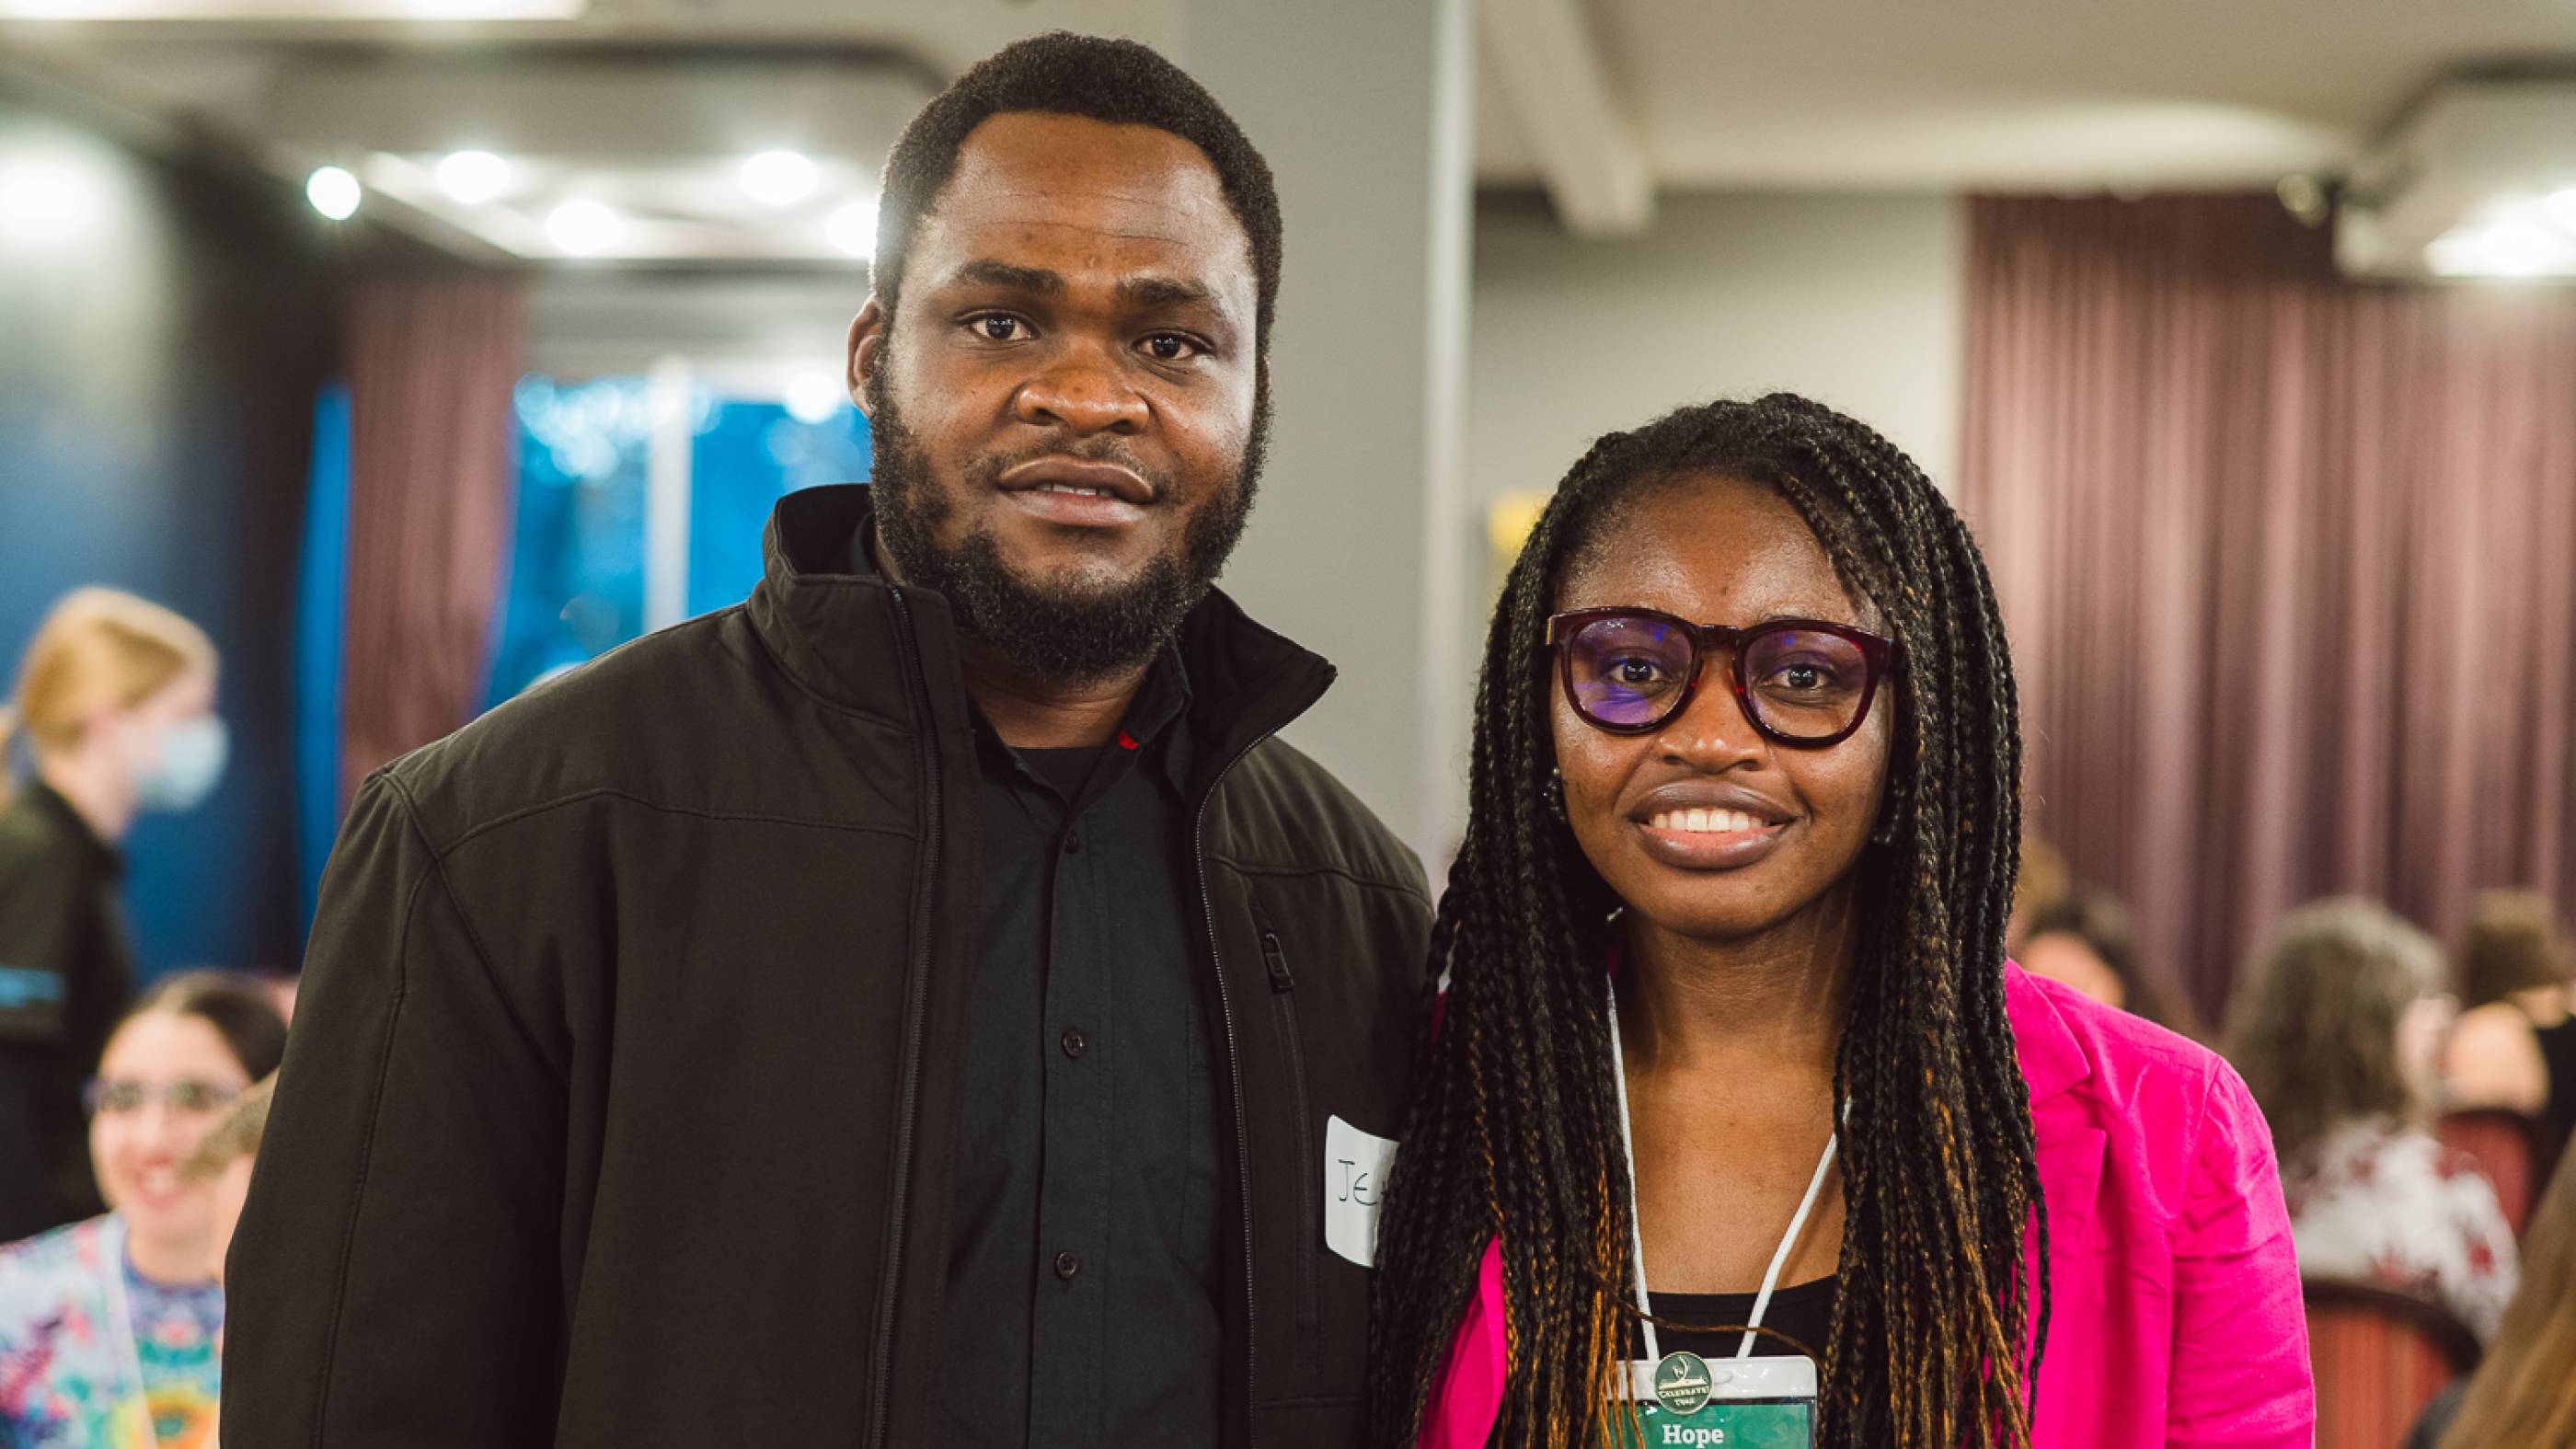 Hope Eze (right), one of the recipients of the Vanier Canada Graduate Scholarship